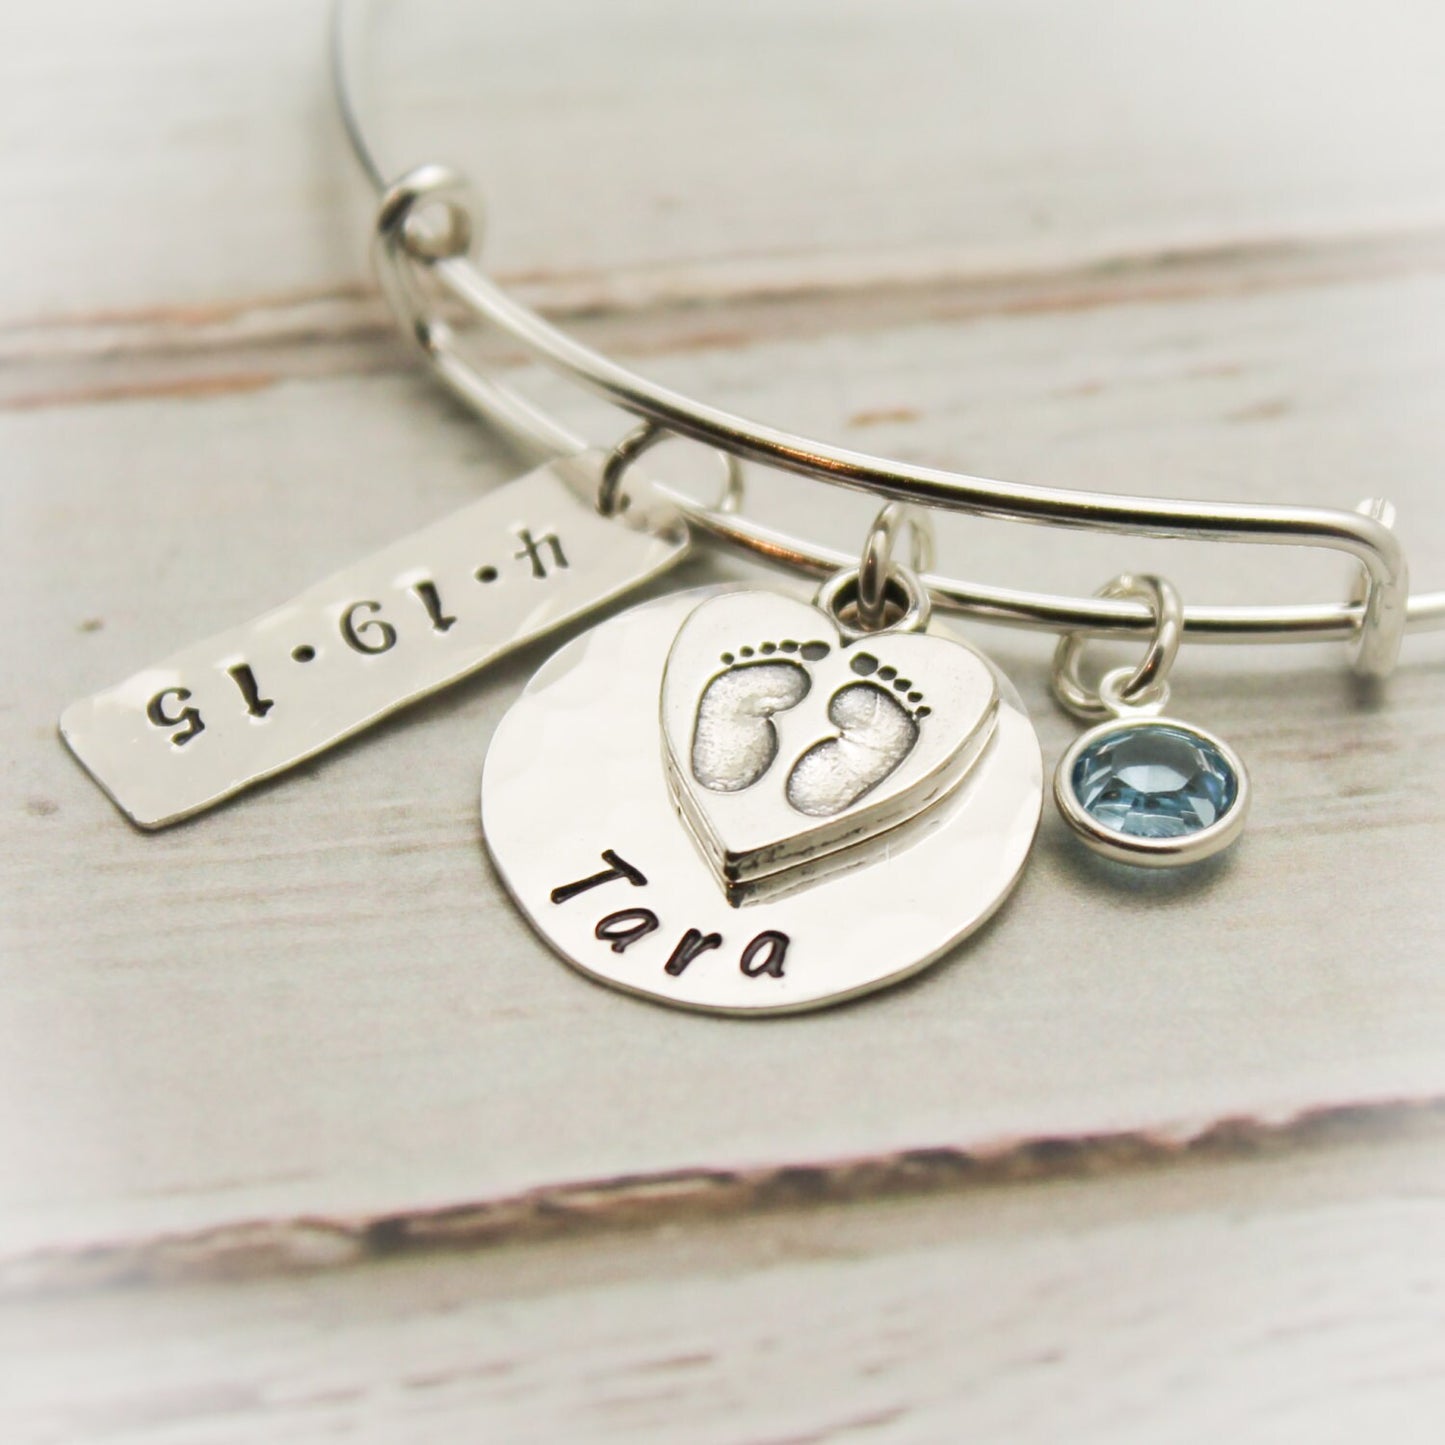 New Mommy Bangle with Footprint Charm in Sterling Silver Personalized Hand Stamped Jewelry